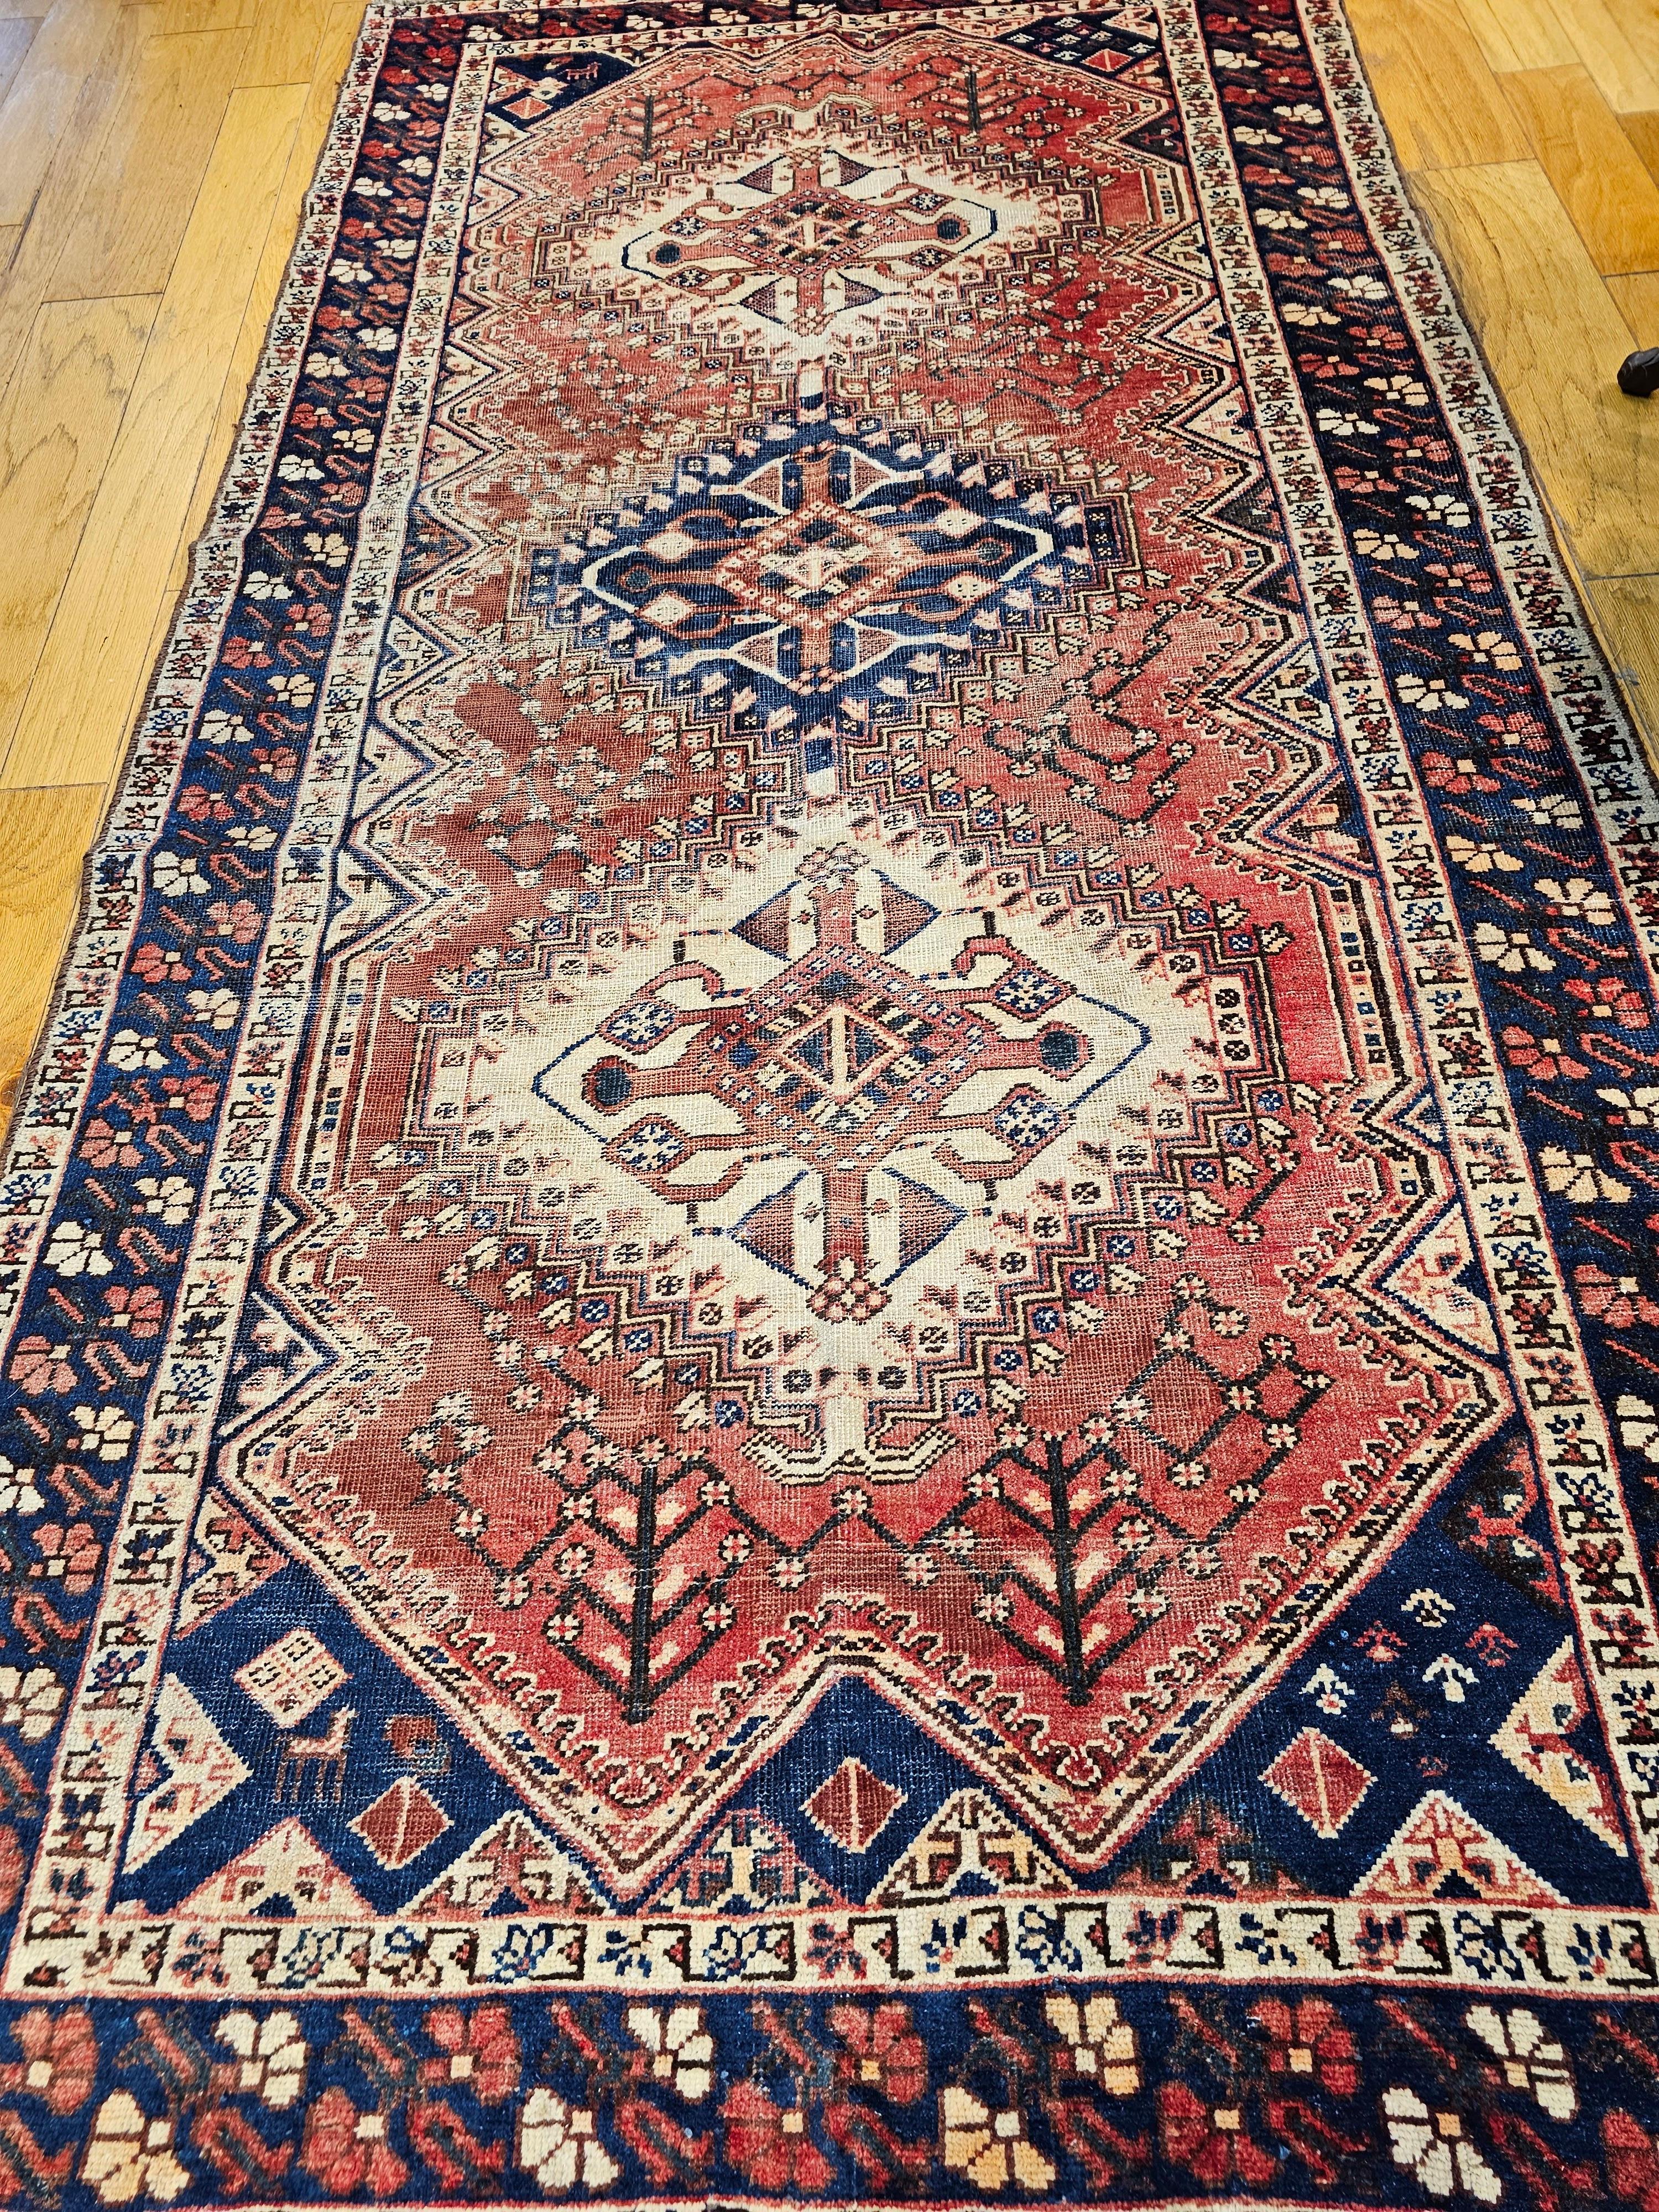  Vintage Persian Hand-Knotted gallery or room size rug from the Shiraz region of Western Persia circa the early 1900s.  The tribal design rug, similar to Qashqai rugs, comes with traditional three vertical medallions which is “Shiraz Signature”